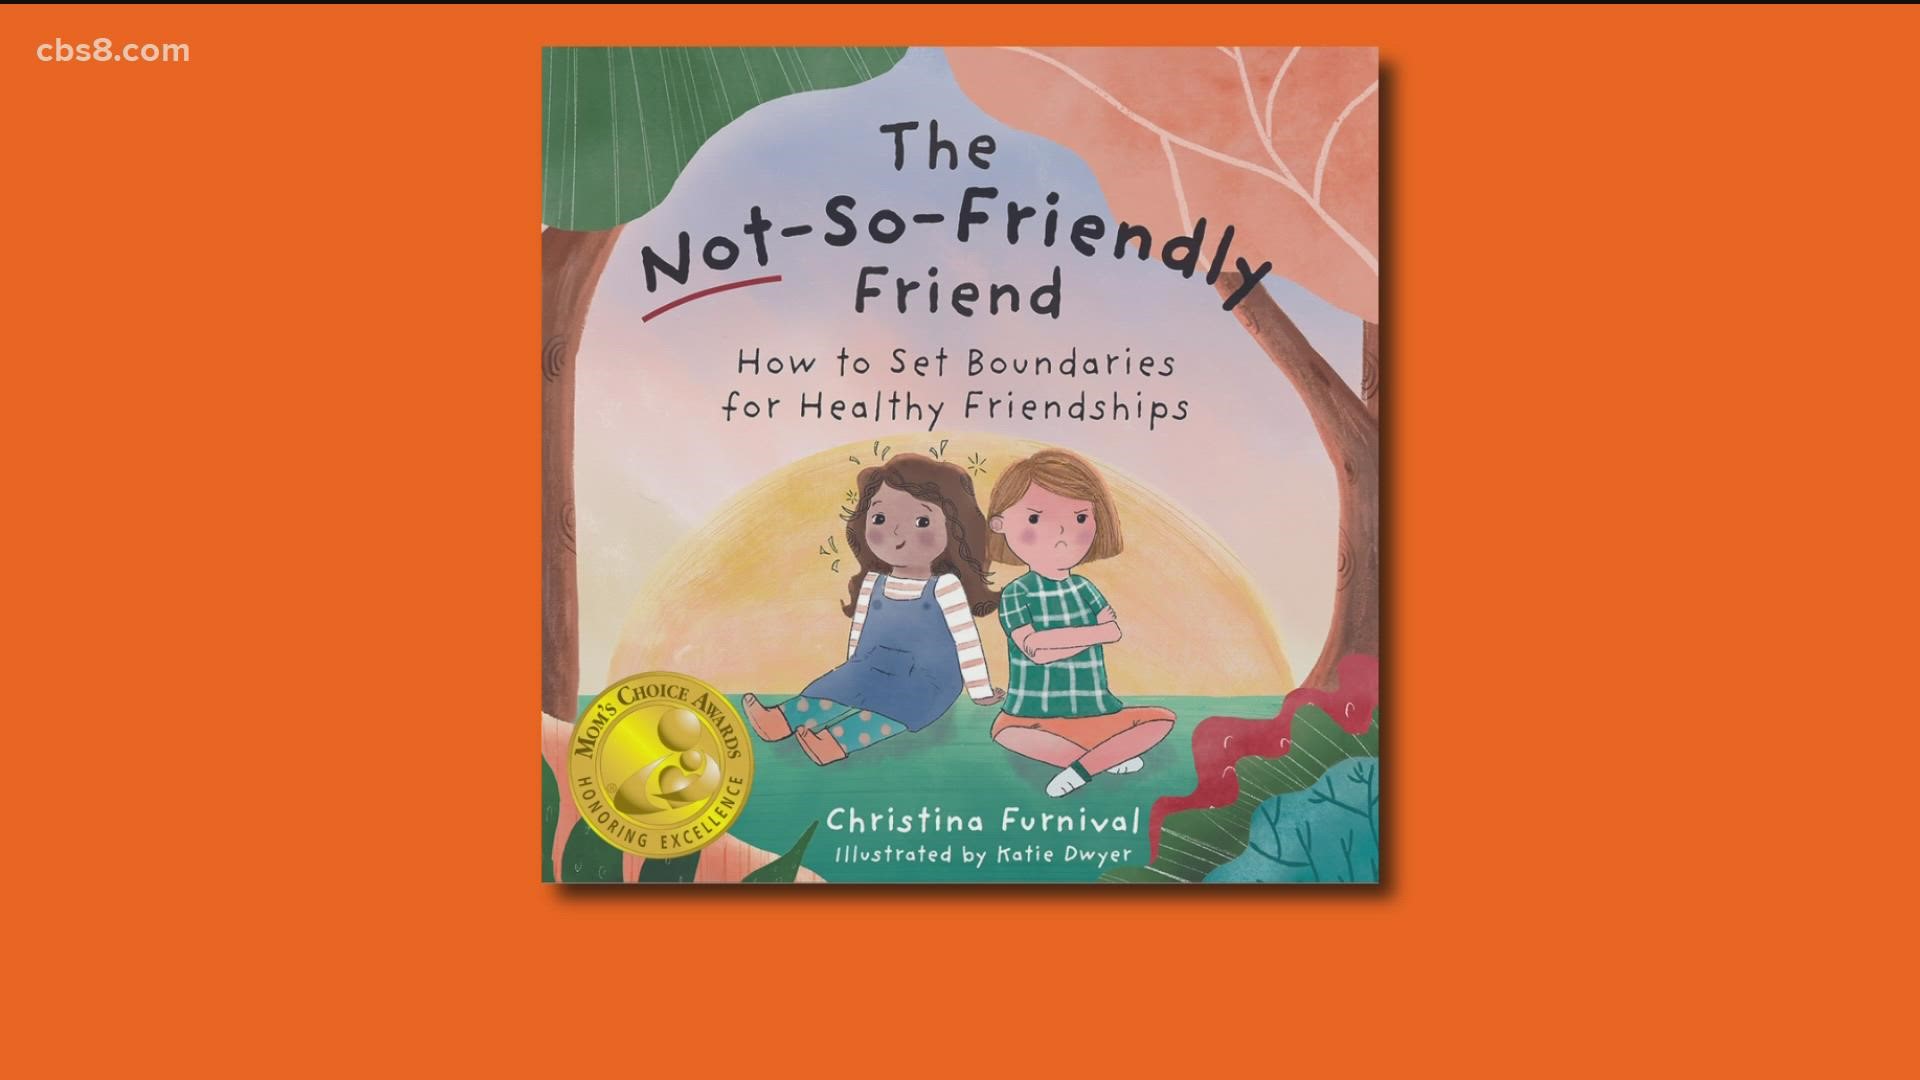 Local mom and counselor, Christina Furnival joined Morning Extra to talk about the importance of finding the right friends and how this book helps.